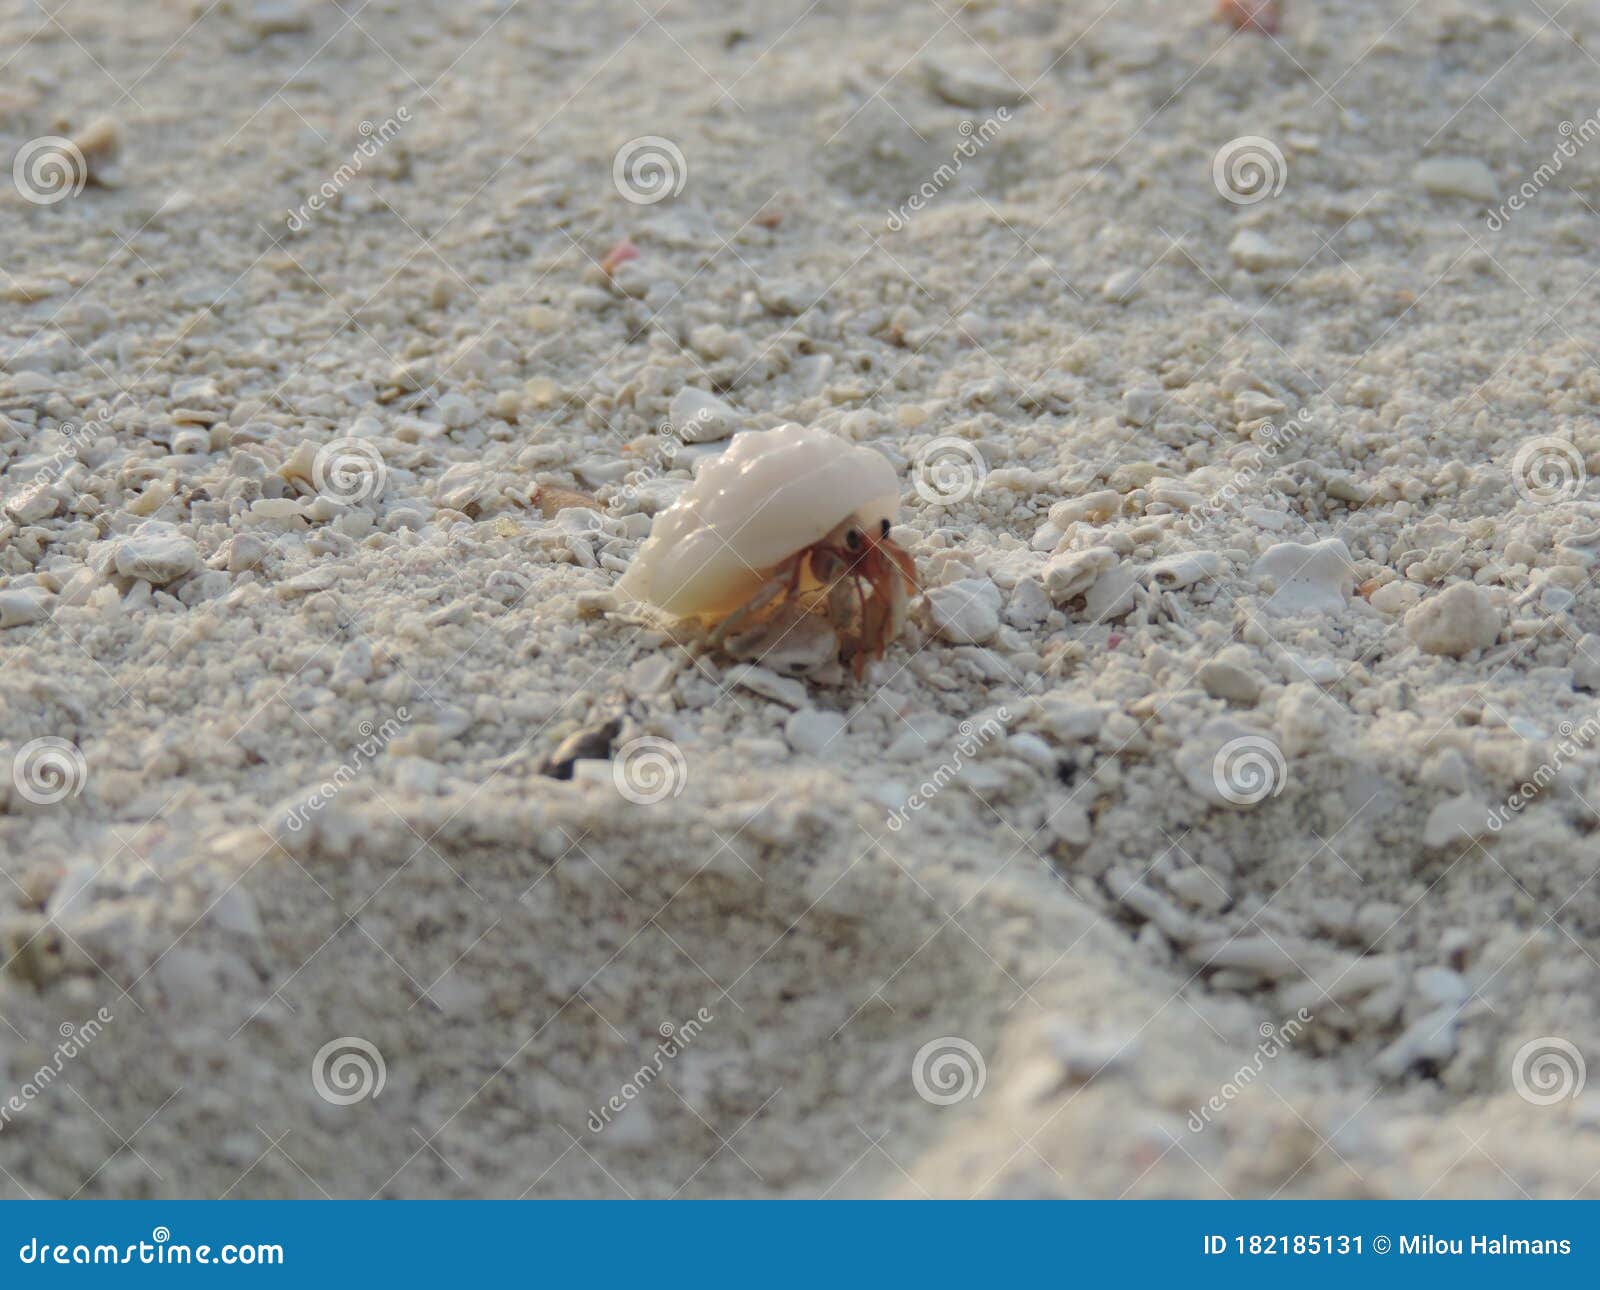 Hermit Crab/ Soldier Crab in Shell Walks on White Beach in Sand Close-up.  Little Wild Sea Animal. Sea Creature Close-up. Maldives Stock Image - Image  of color, background: 182185131